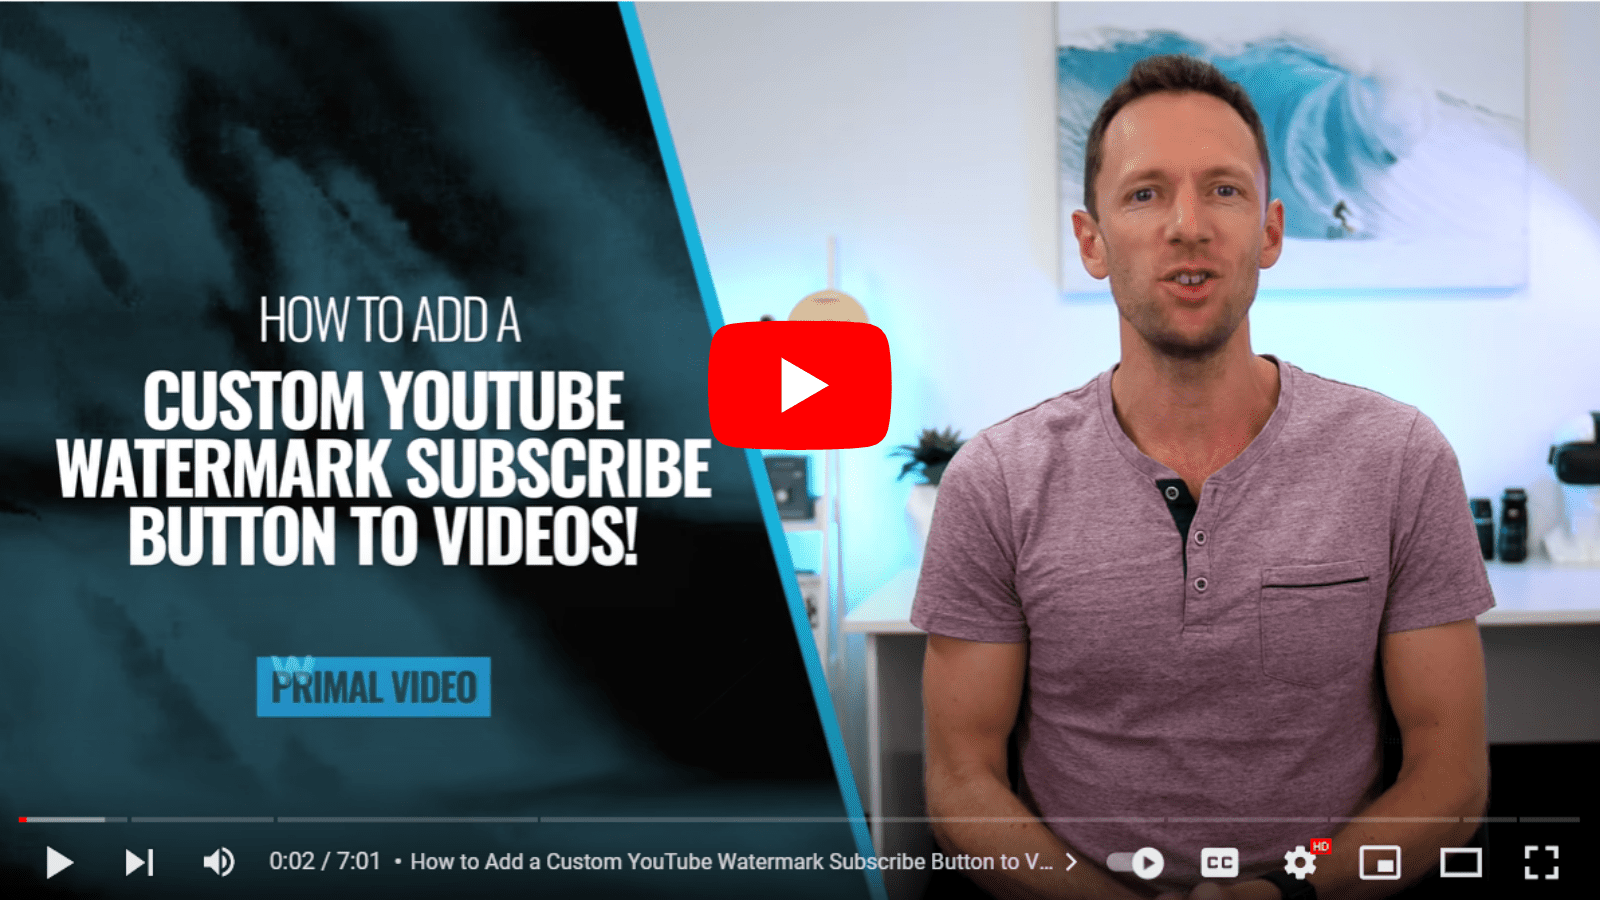 How to add watermark subscribe button video representation